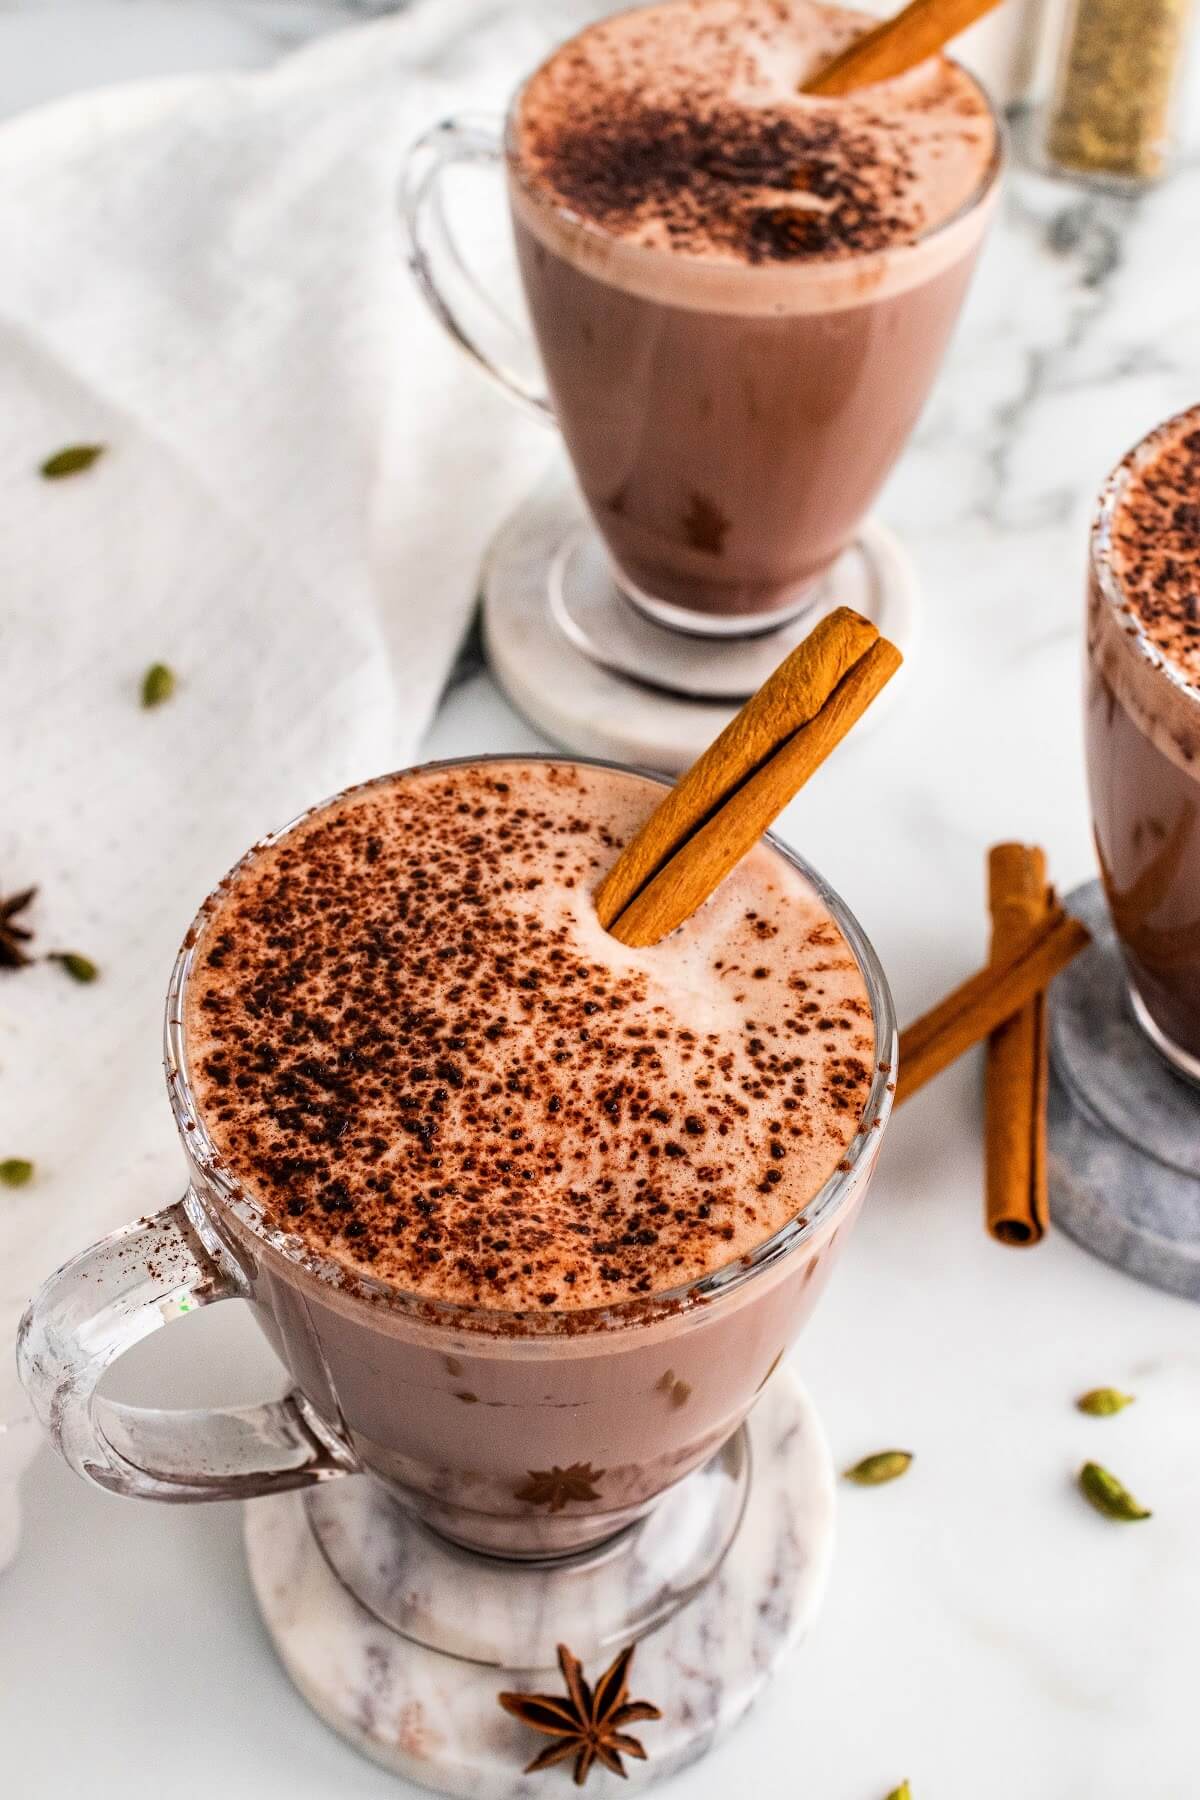 Three glass mugs filled with hot chocolate and garnished with cinnamon sticks and ground cinnamon, sitting on marble coasters with dried star anise pods, cinnamon sticks and cardamom pods sitting around them and a white kitchen towel to the side.